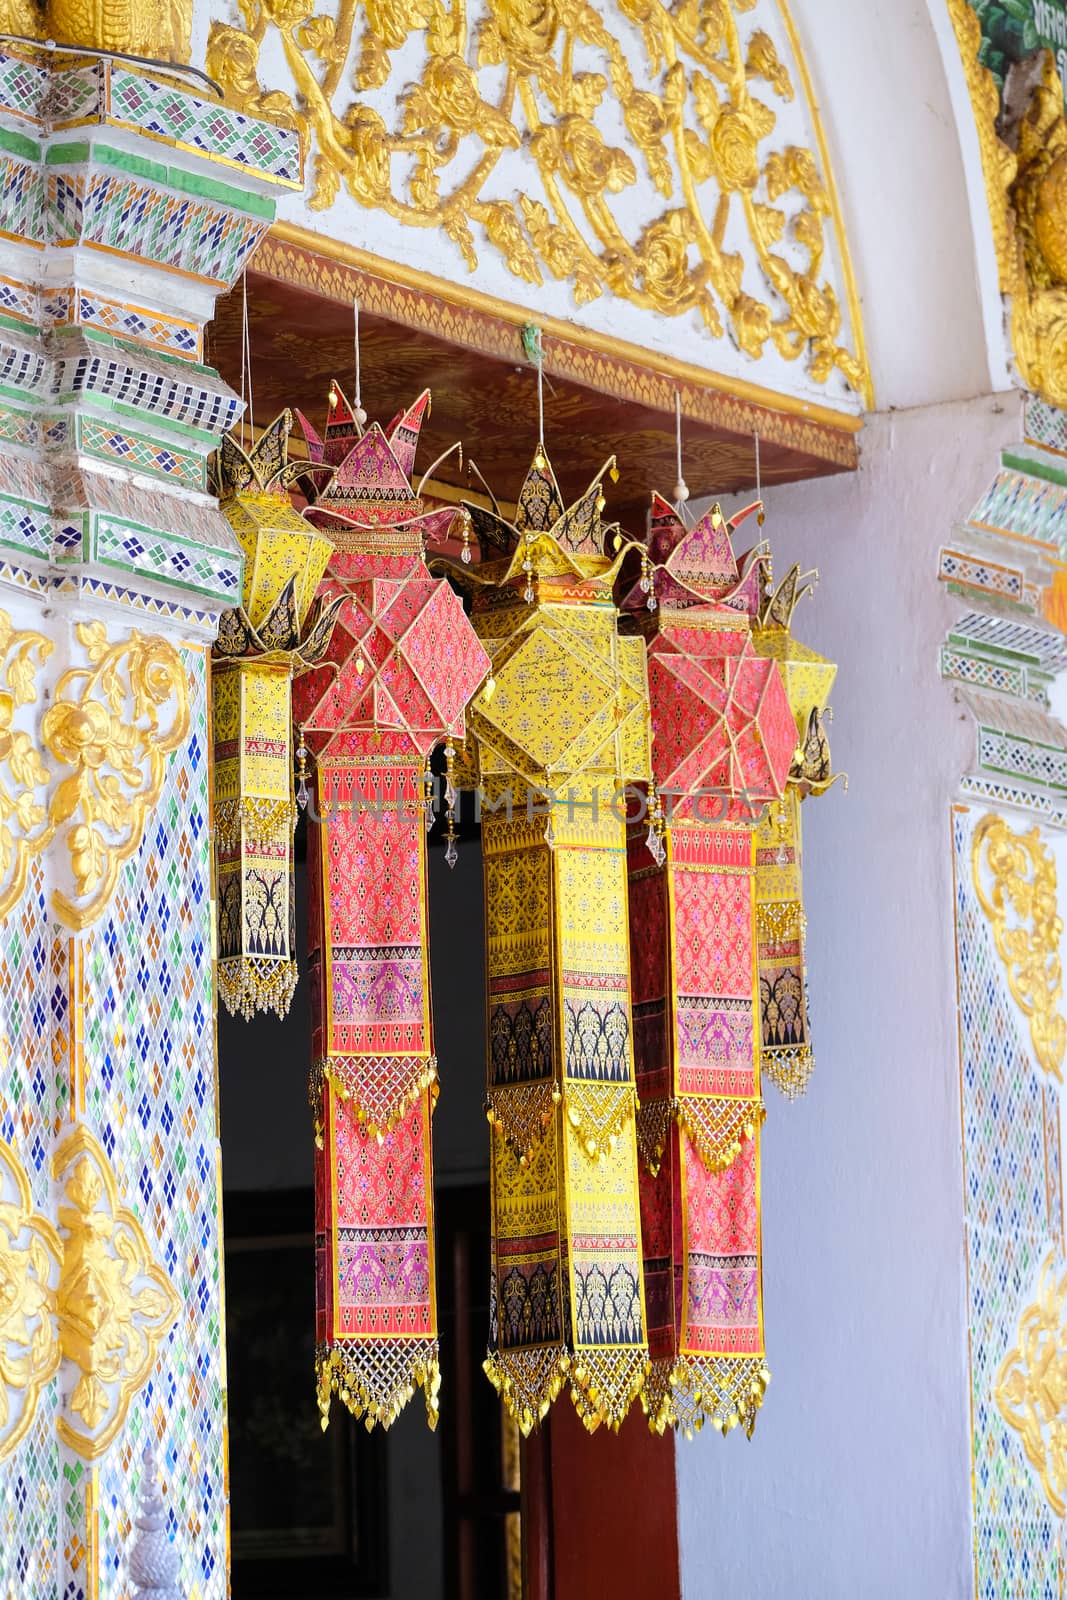 a group of colorful traditional hand painted silk cloth lanterns decorating the window of the main temple of Wat Phra That Hariphunchai, the iconic Buddhist landmark in Lamphun City, Thailand